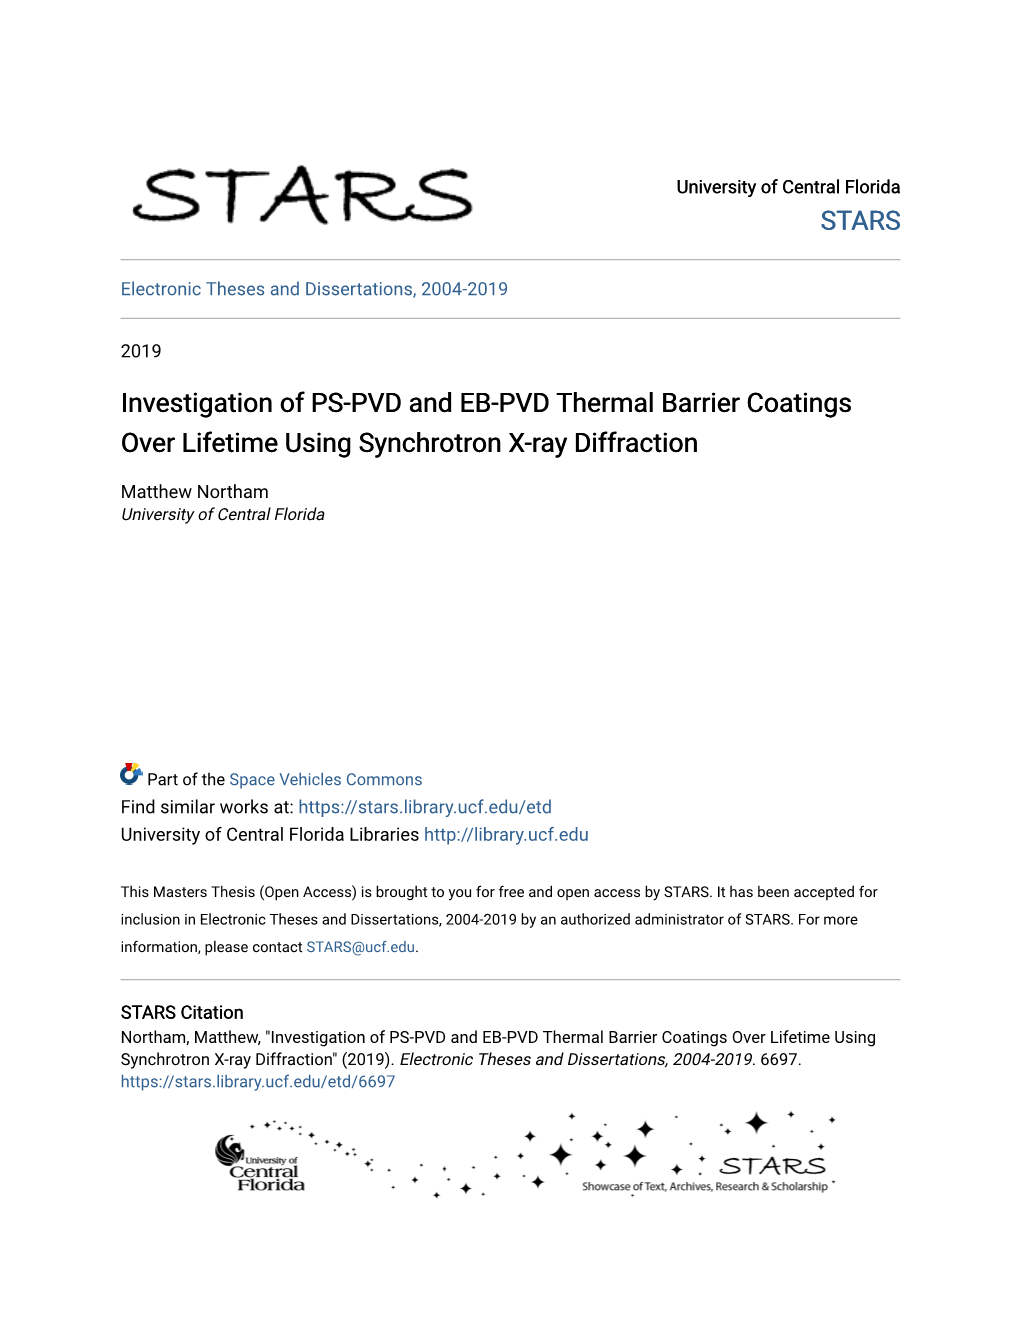 Investigation of PS-PVD and EB-PVD Thermal Barrier Coatings Over Lifetime Using Synchrotron X-Ray Diffraction